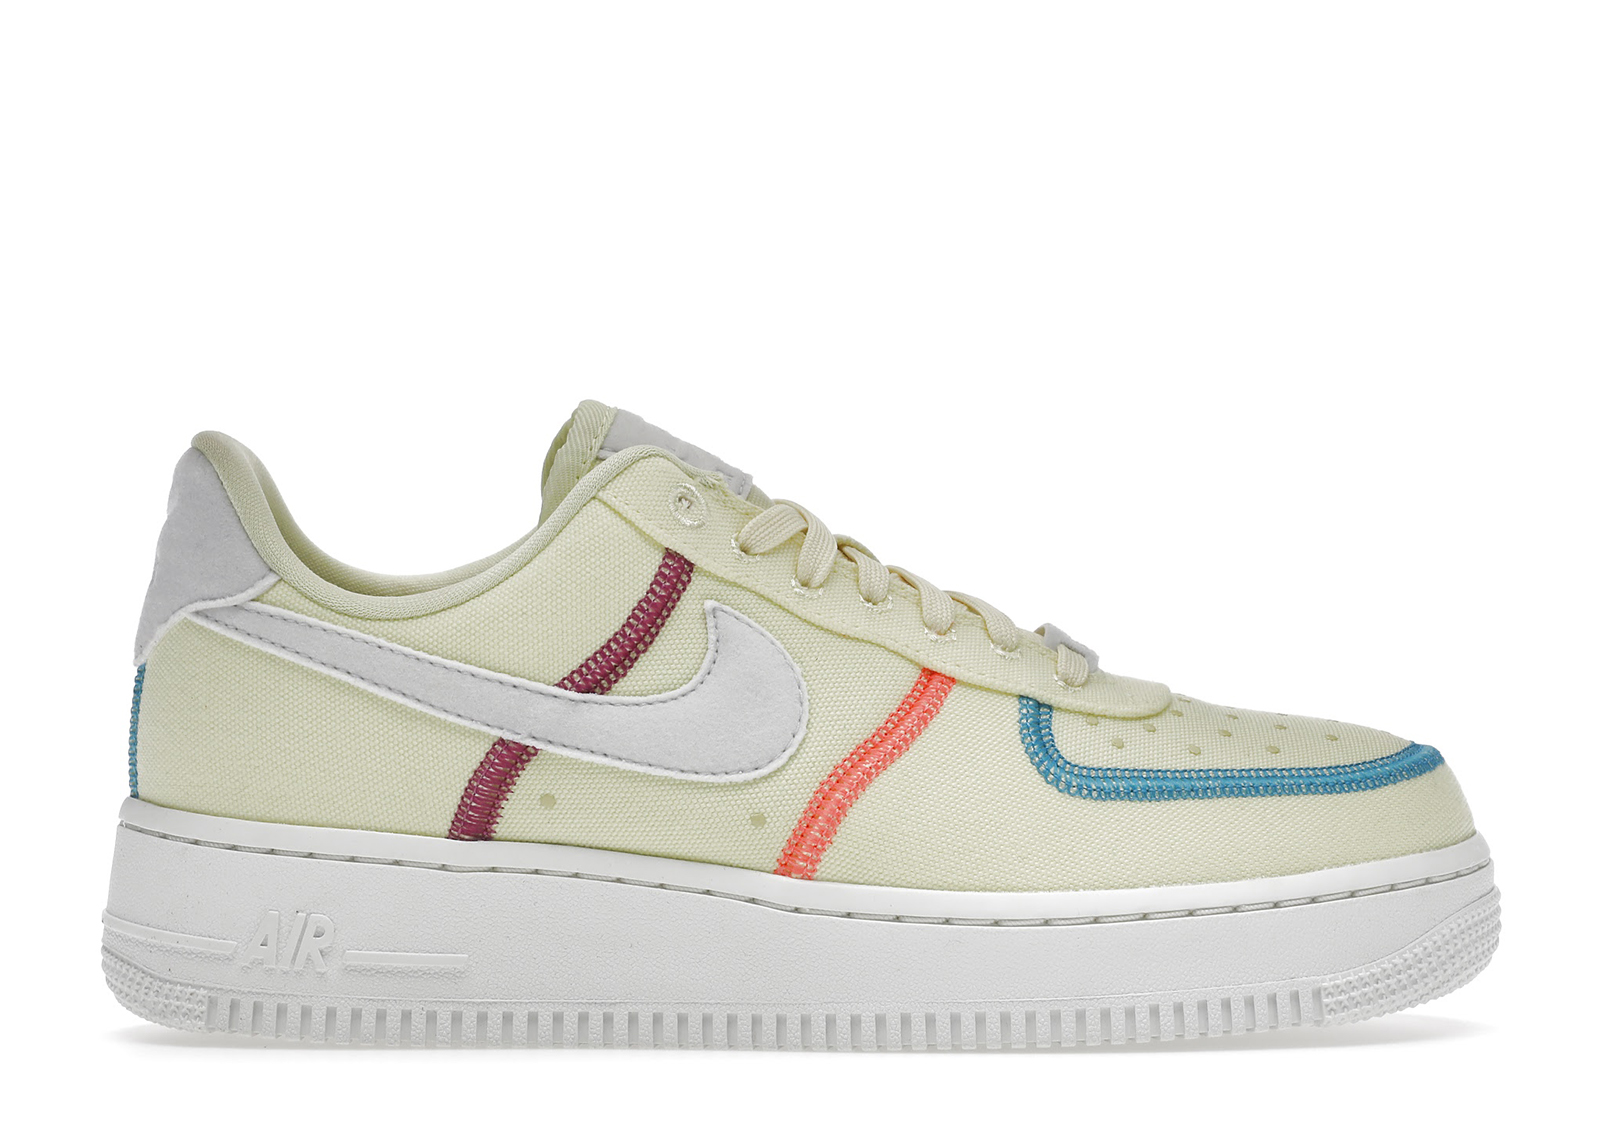 Nike Air Force 1 LX Life Lime (Women's)